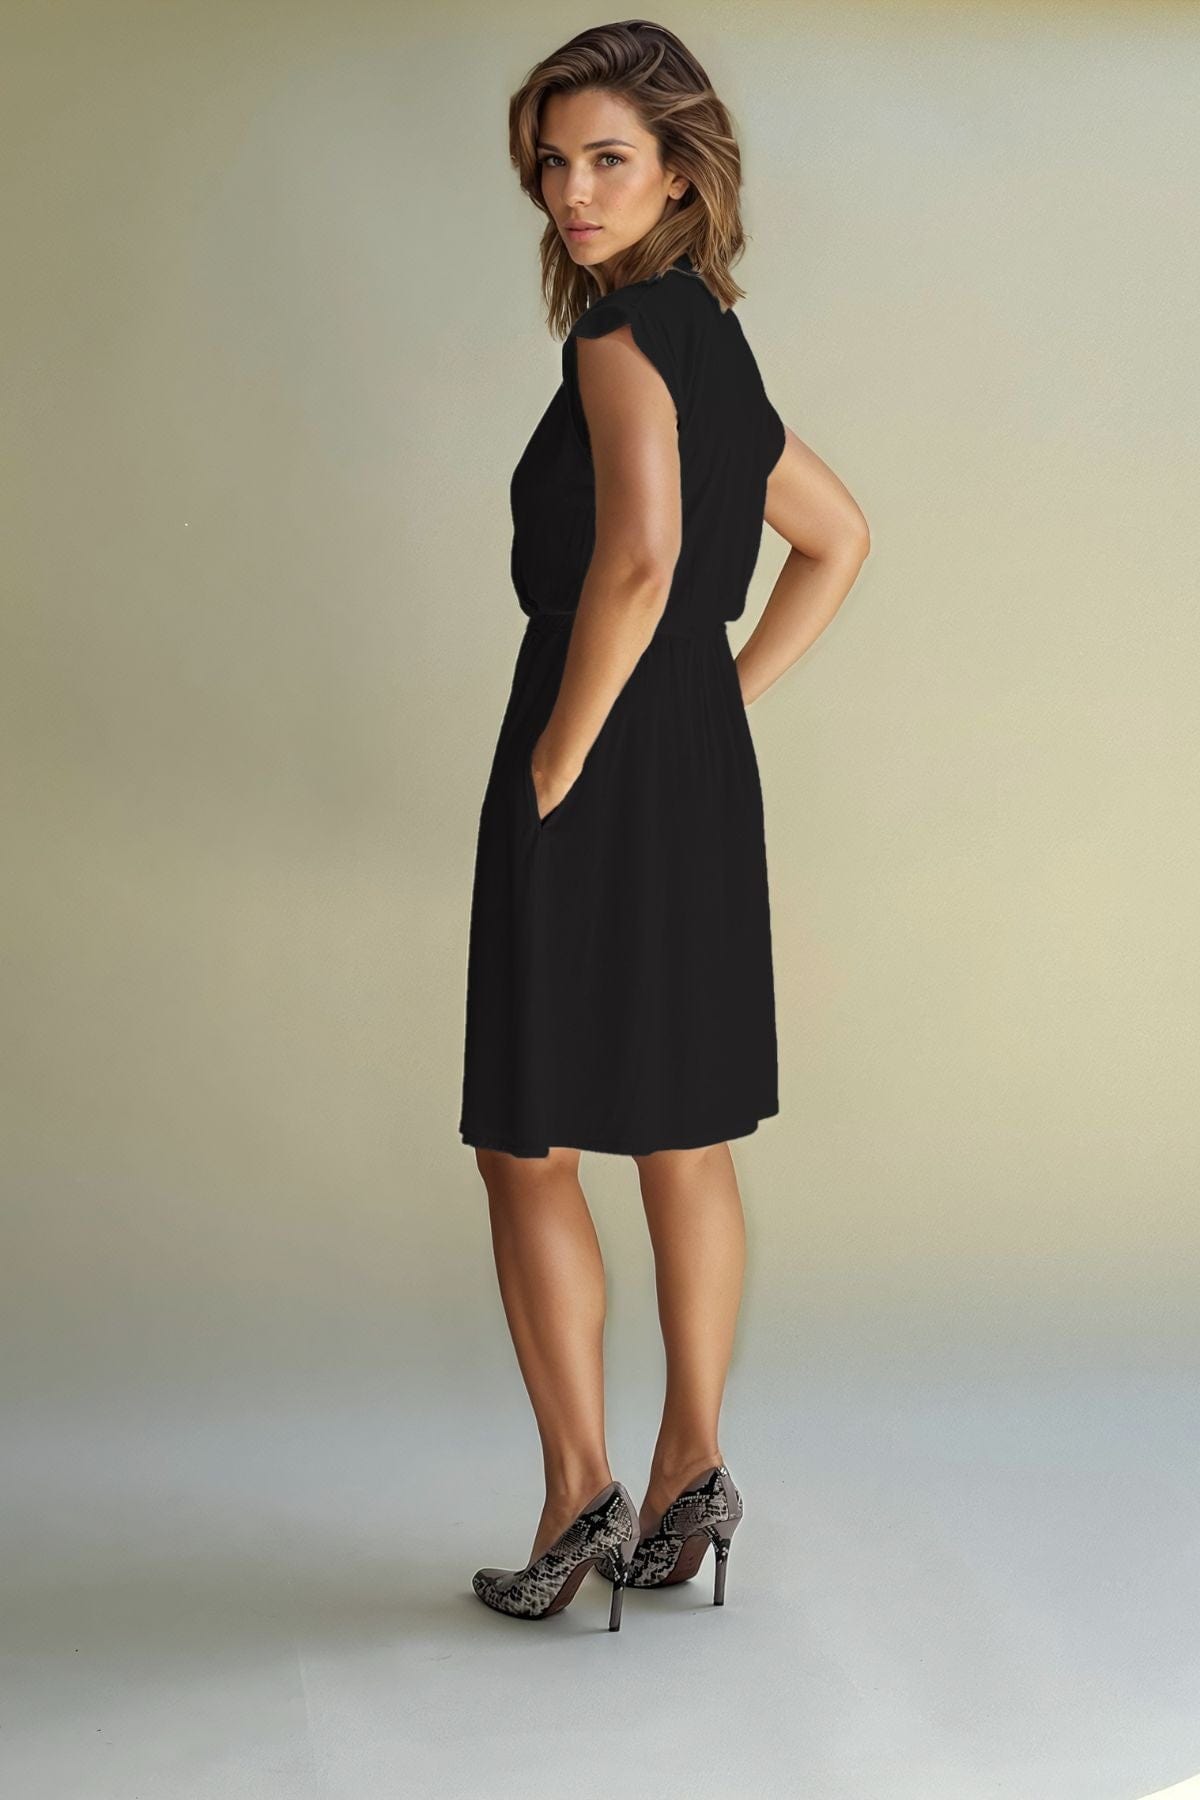 Harper Nursing Dress in midnight 3/4 side view while wearing high heels for date night